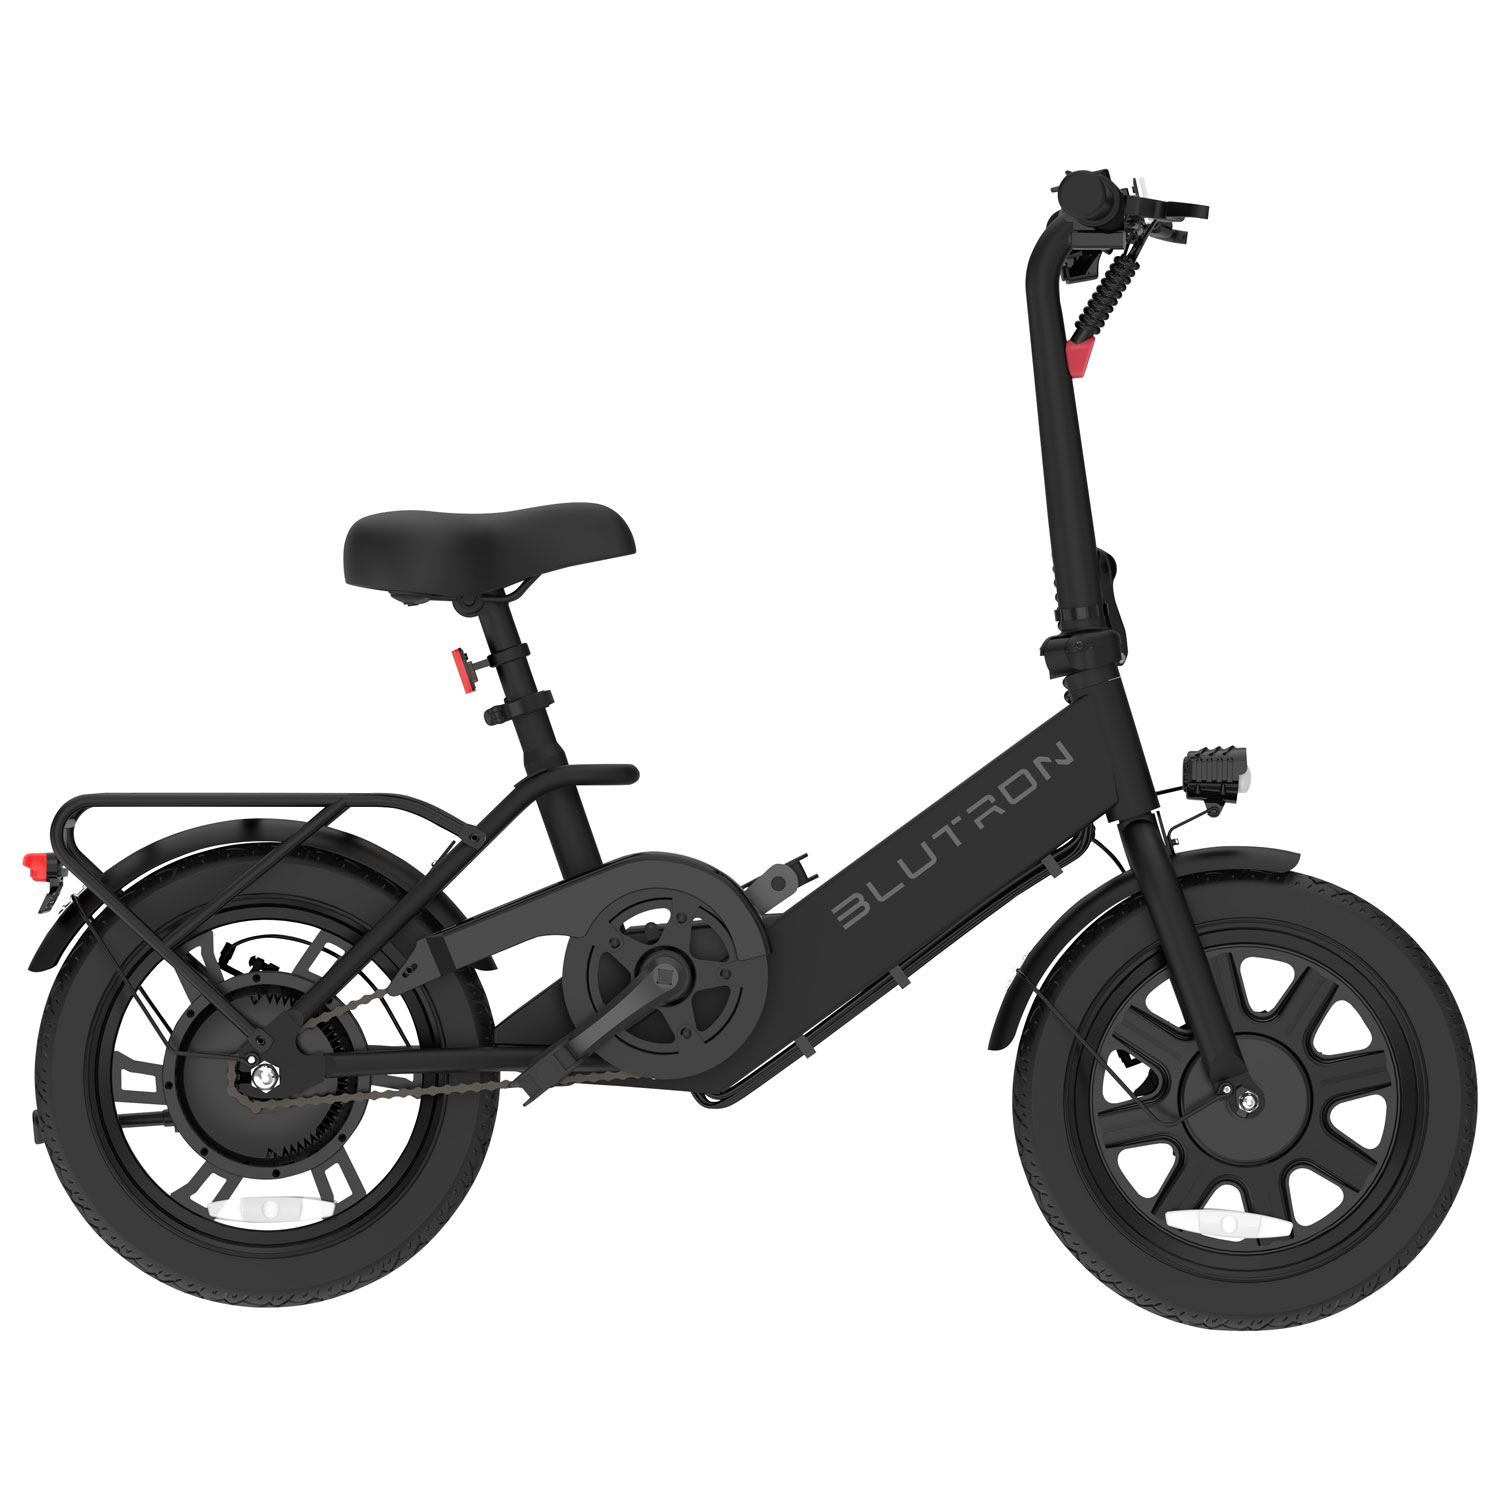 Blutron EB350F 350W Foldable Compact Electric Bike (Up to 33km Battery Range / 32km/h Top Speed) - Black - Exclusive Retail Partner